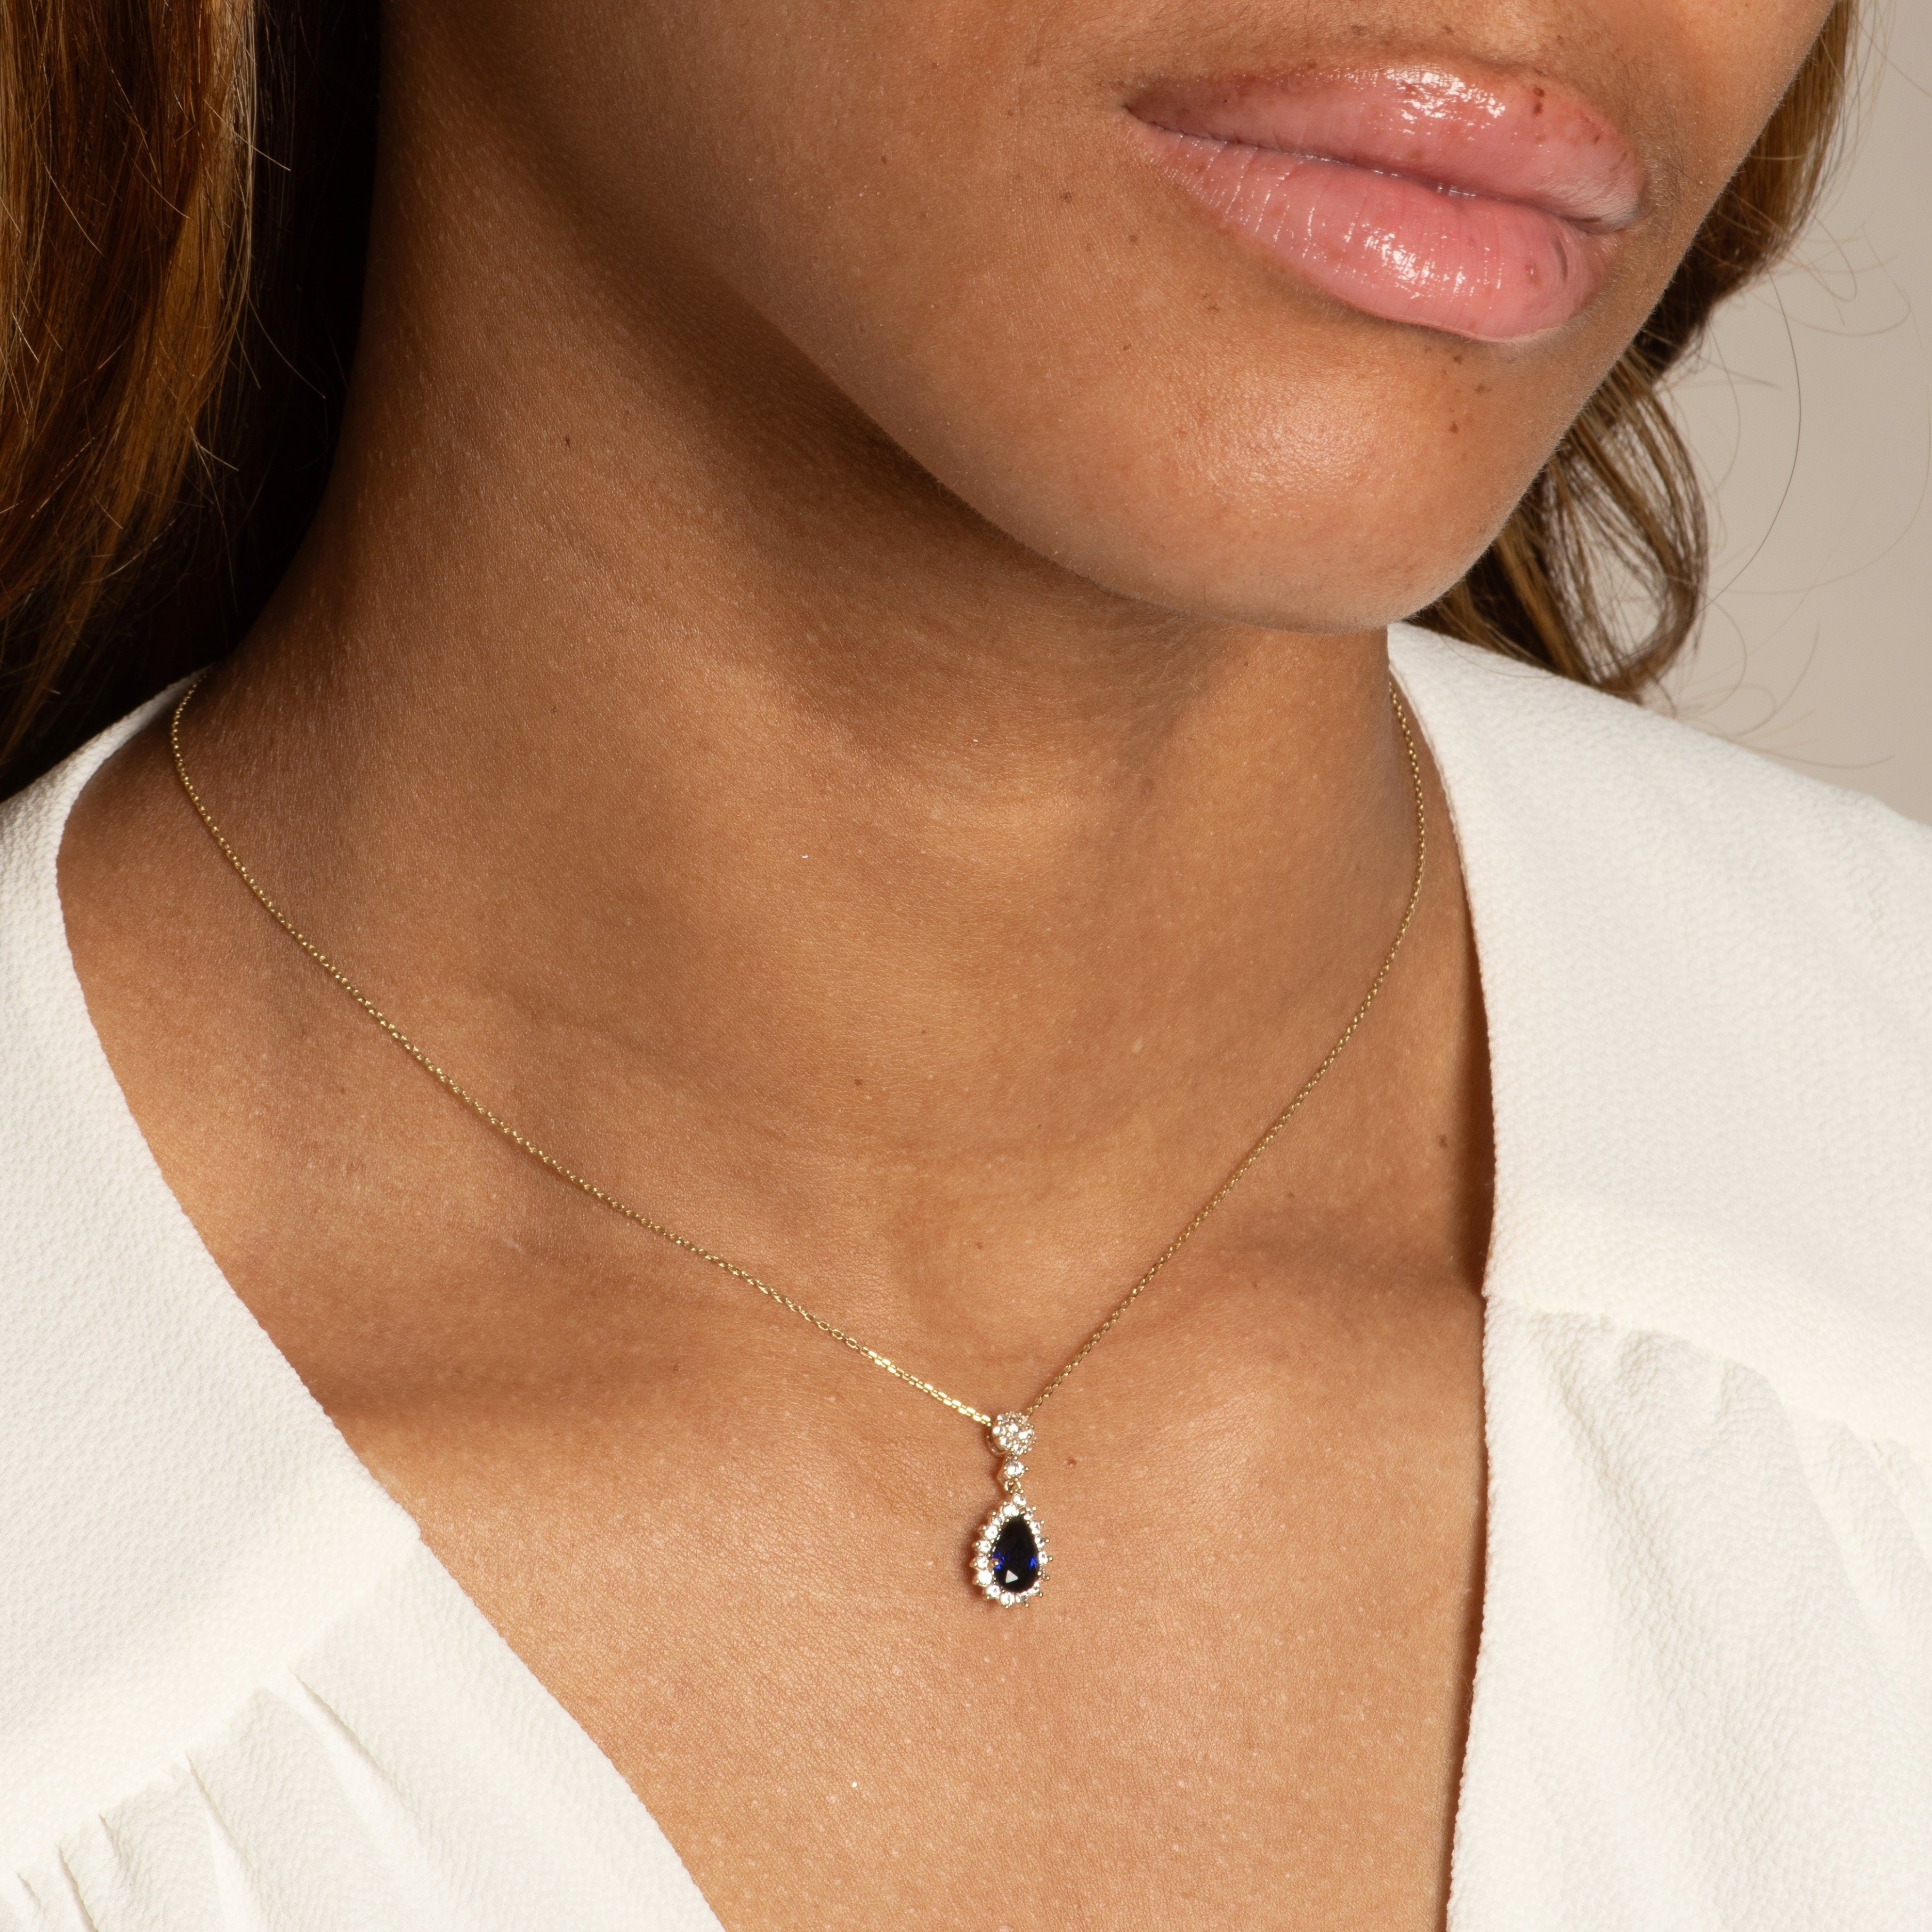 Teardrop Shaped Sapphire with White Sapphire Halo Necklaces Estella Collection #product_description# 32721 10k 925 Birthstone #tag4# #tag5# #tag6# #tag7# #tag8# #tag9# #tag10#